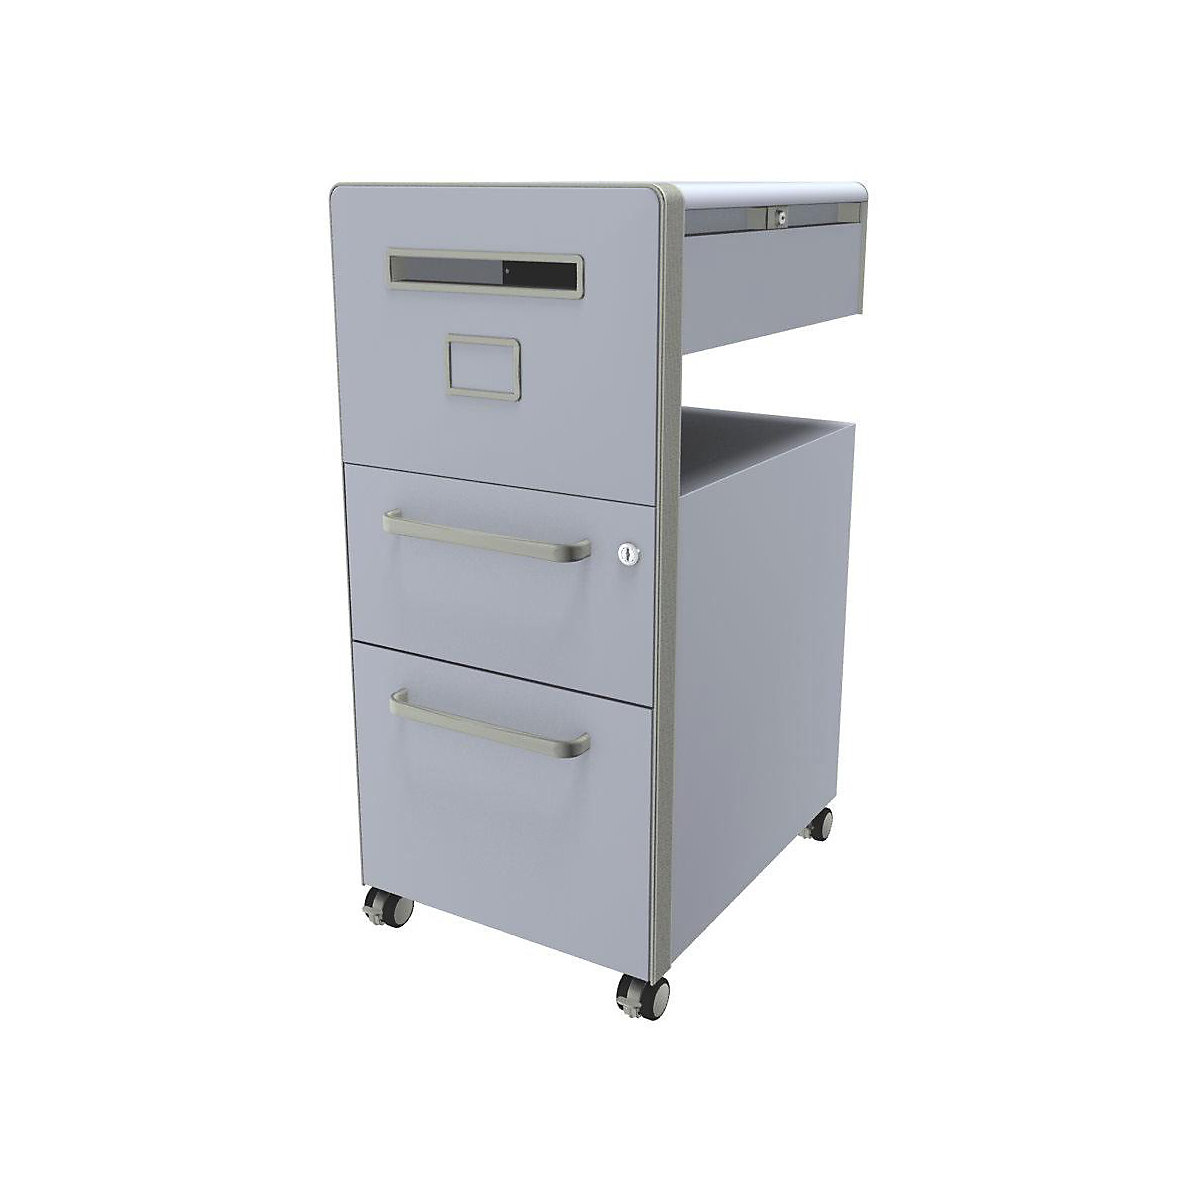 Bite™ pedestal furniture, with 1 pin board, opens on the left side – BISLEY, with 1 universal drawer, 1 suspension file drawer, alaska-9